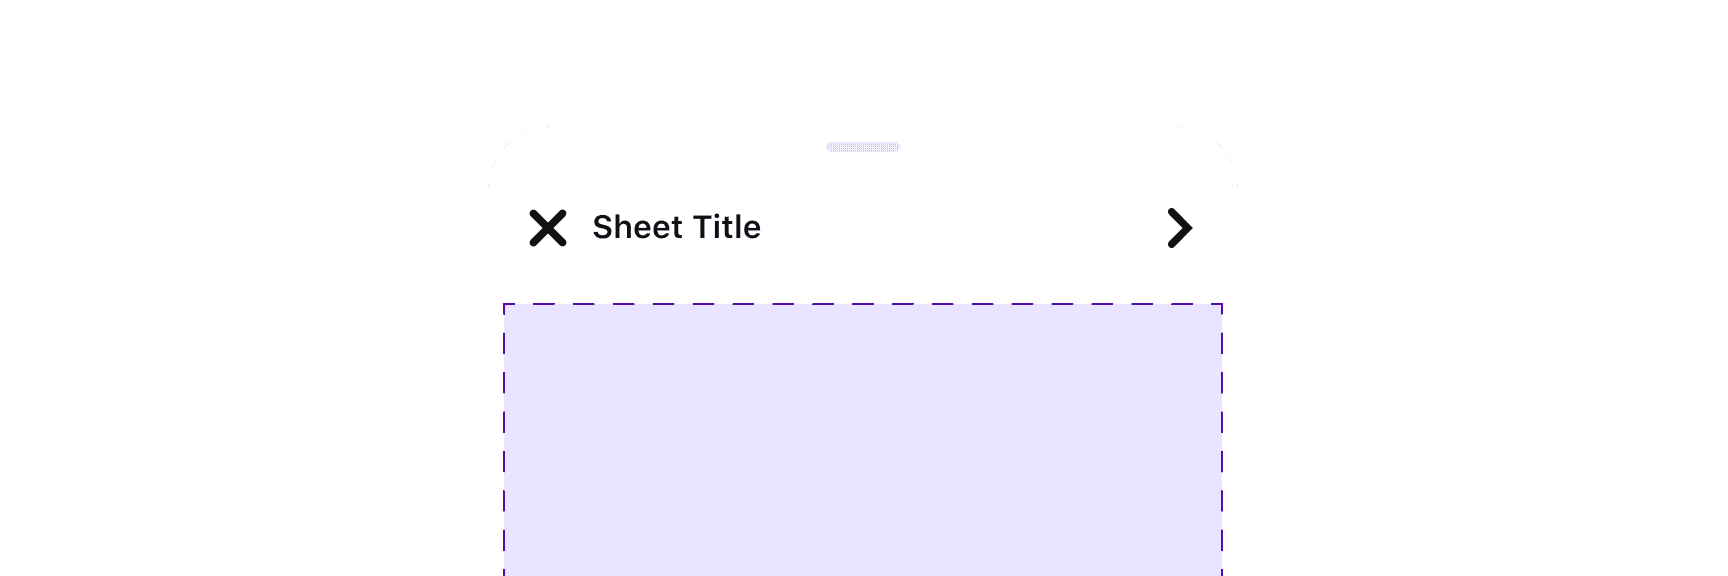 examples of three types of sheets: a Full sheet, a Partial resizable sheet and an Action sheet